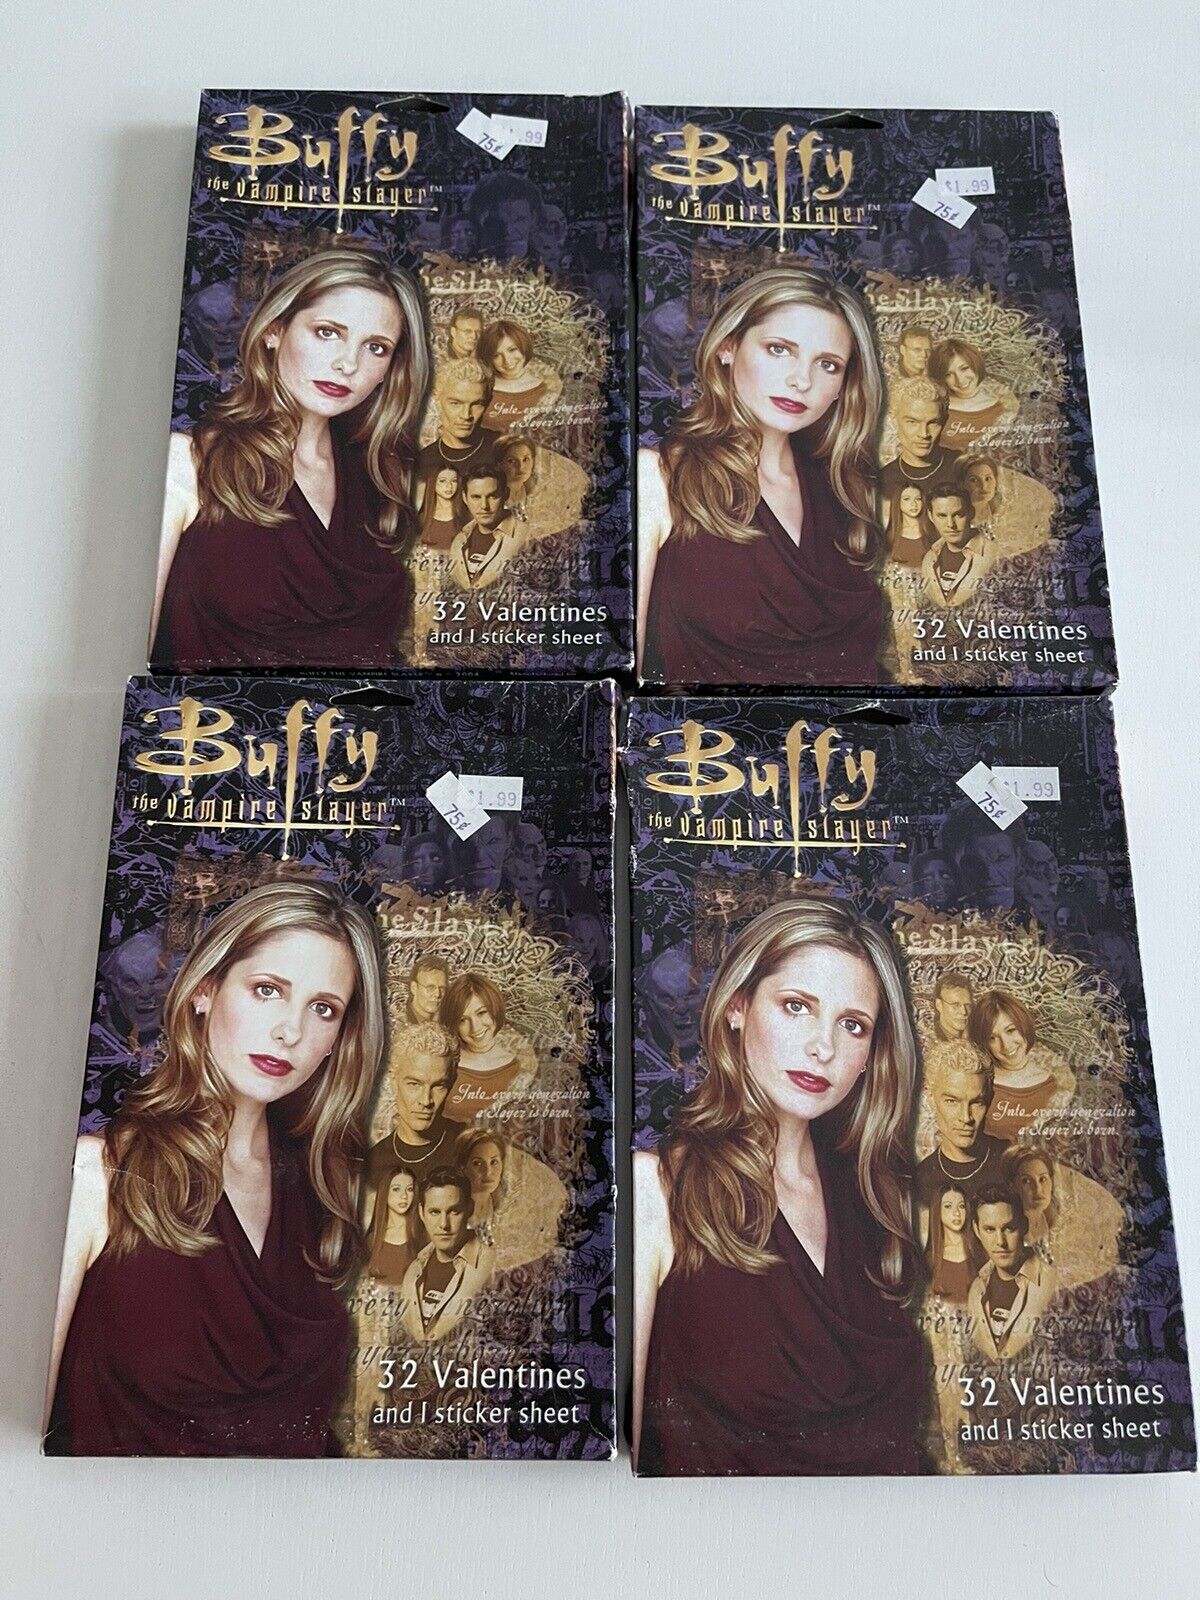 4x Buffy the Vampire Slayer 2004 Valentine's Day Cards + Stickers UNOPENED New